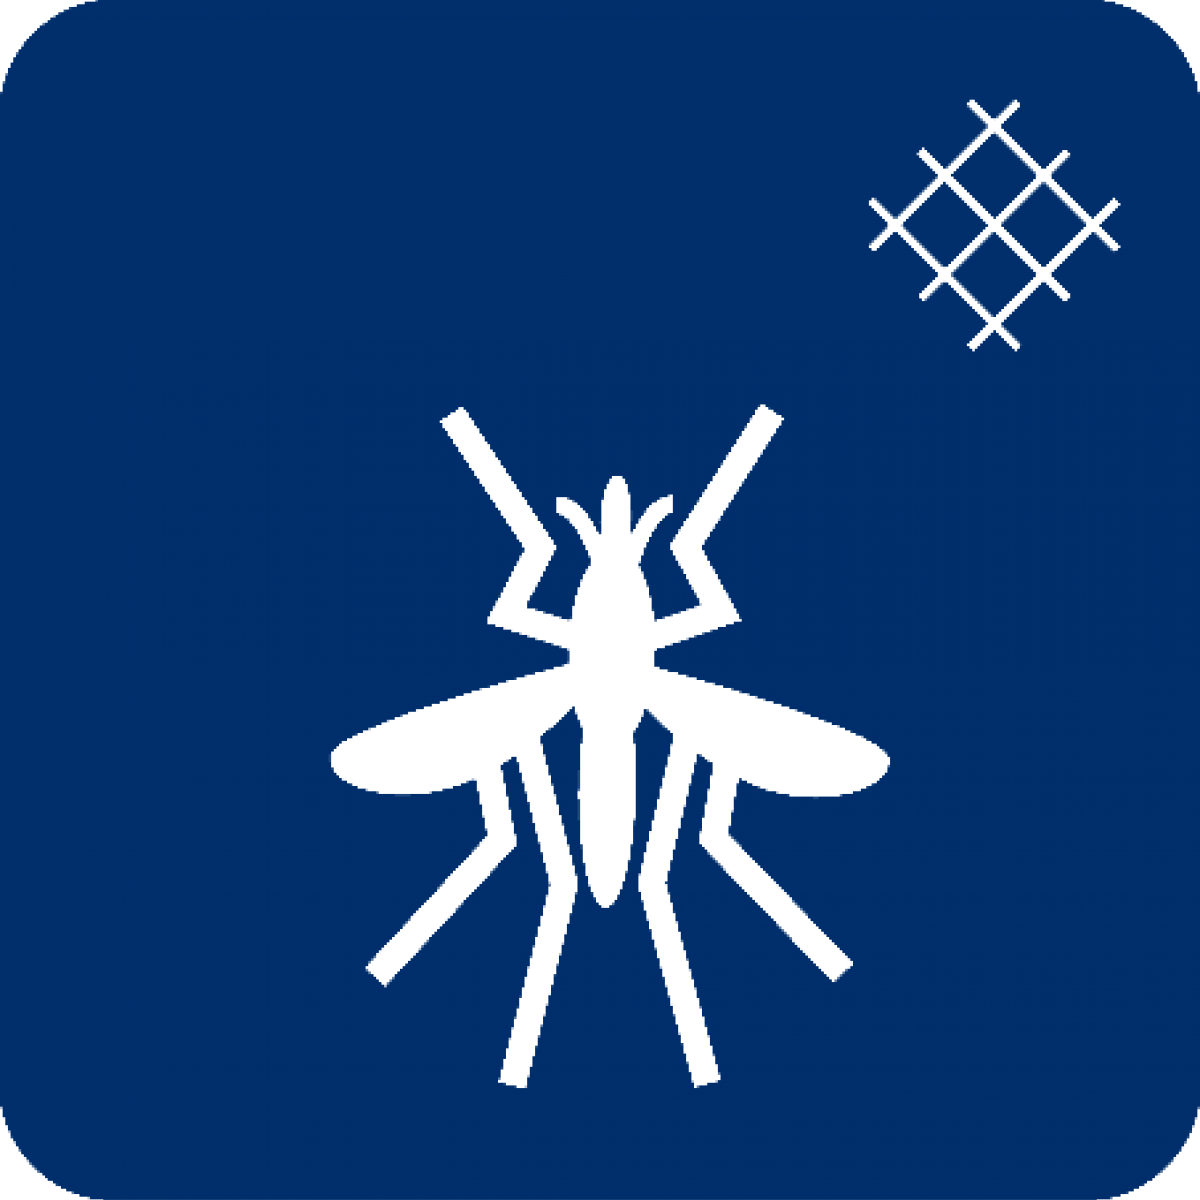 An illustration of a mosquito